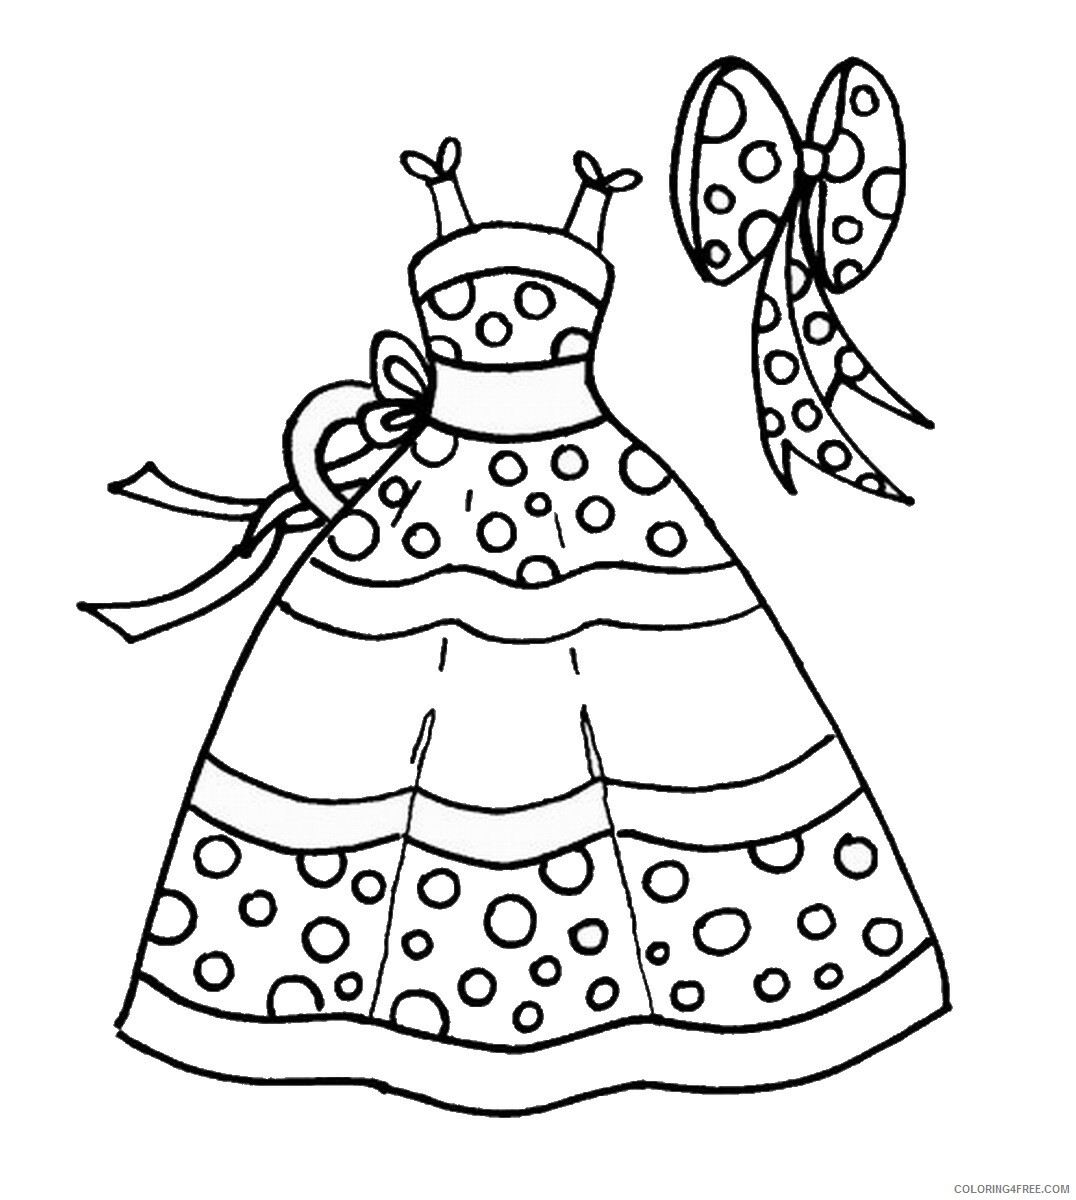 Fashion Coloring Pages for Girls fashion_cl_25 Printable 2021 0461 Coloring4free